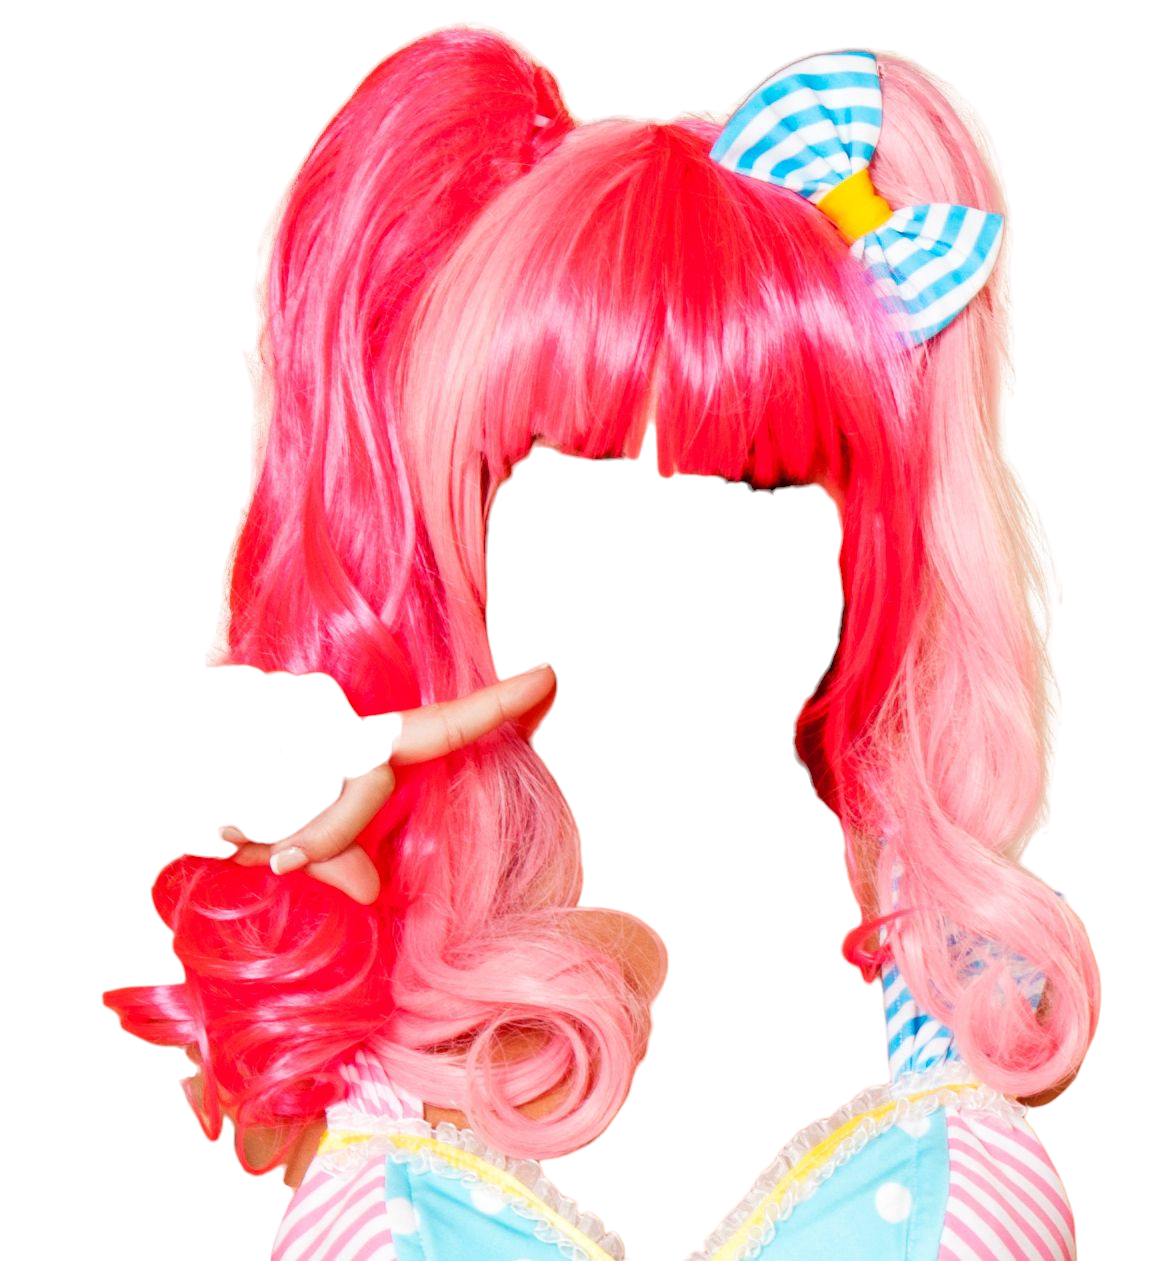 Roma Costume Wig Only Costume Accessory Pink One Size